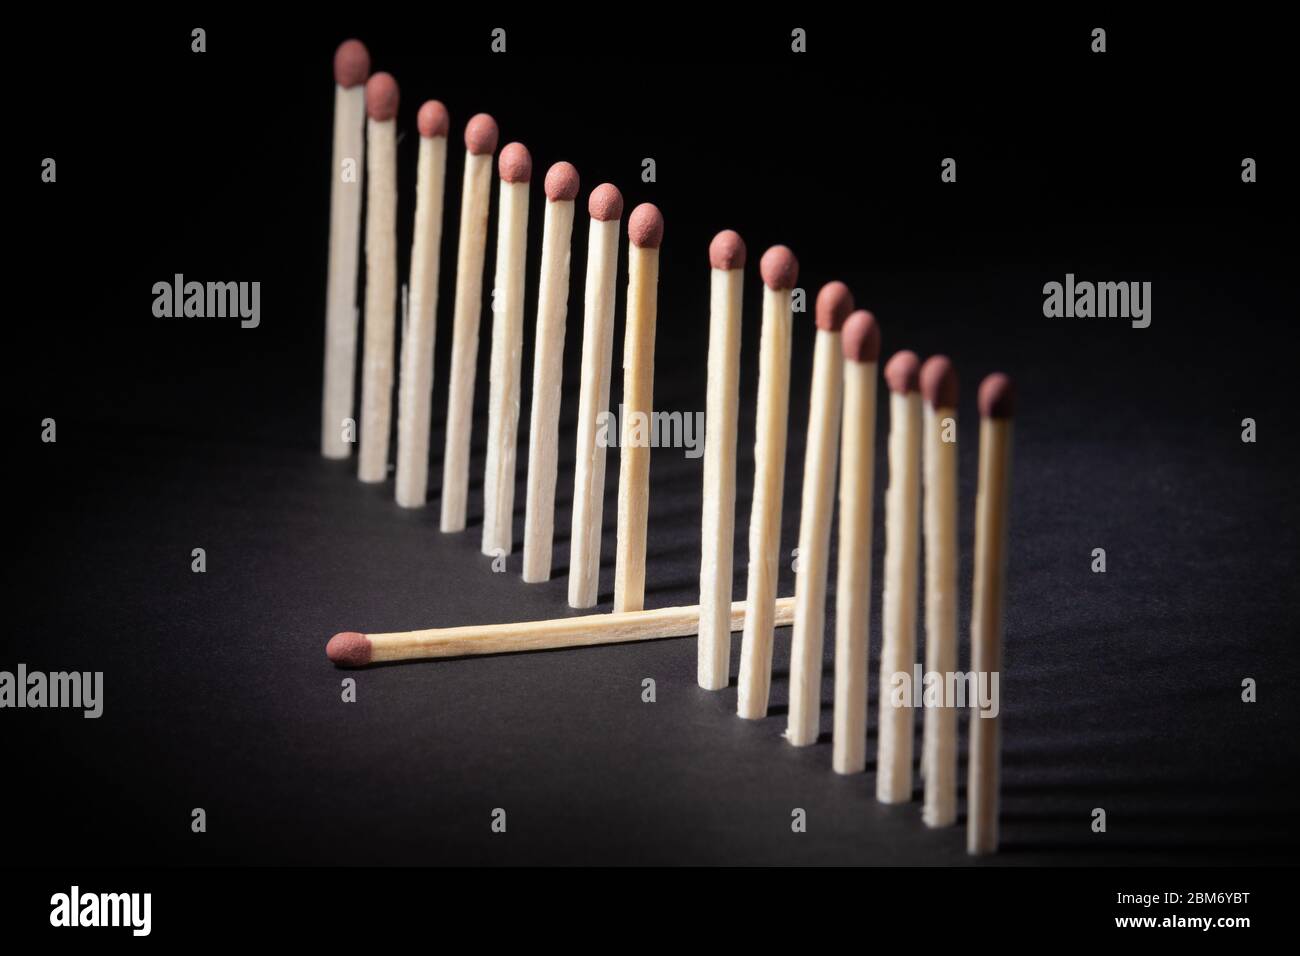 A row of upright unburnt matchsticks with one lying down out of the line Stock Photo